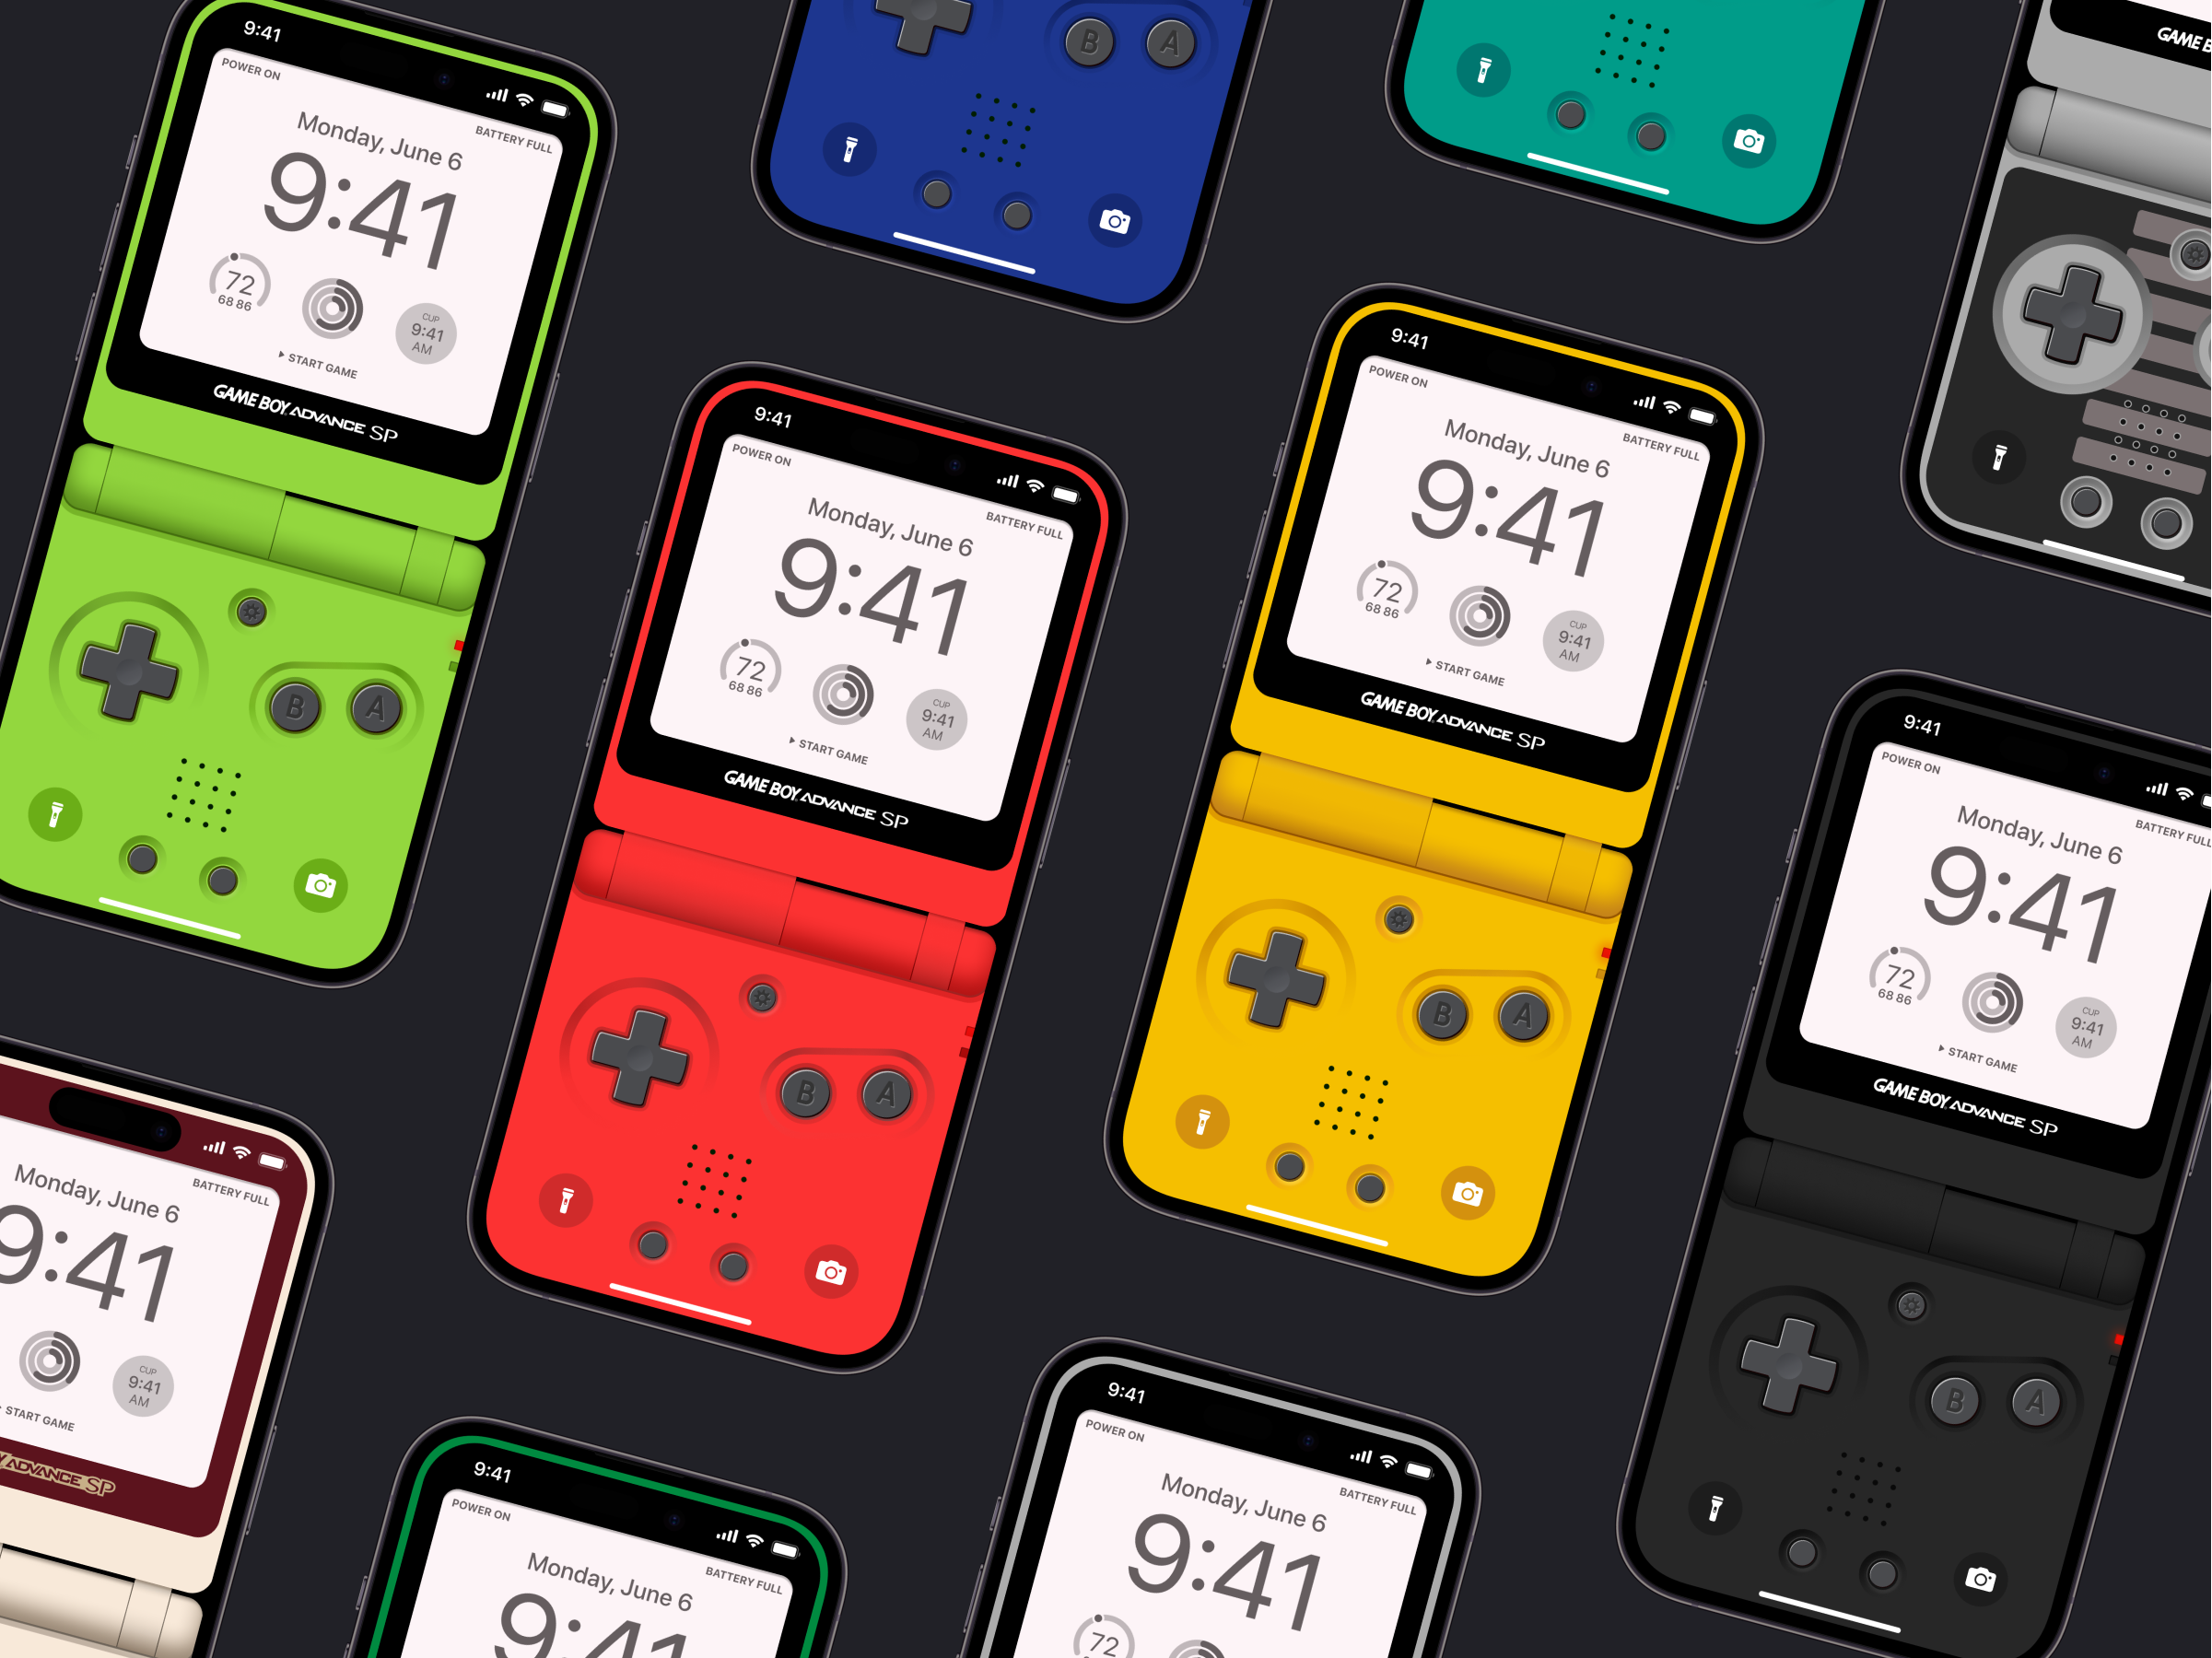 GameBoy Advance SP - Wallpaper Collection by Isa Pinheiro on Dribbble